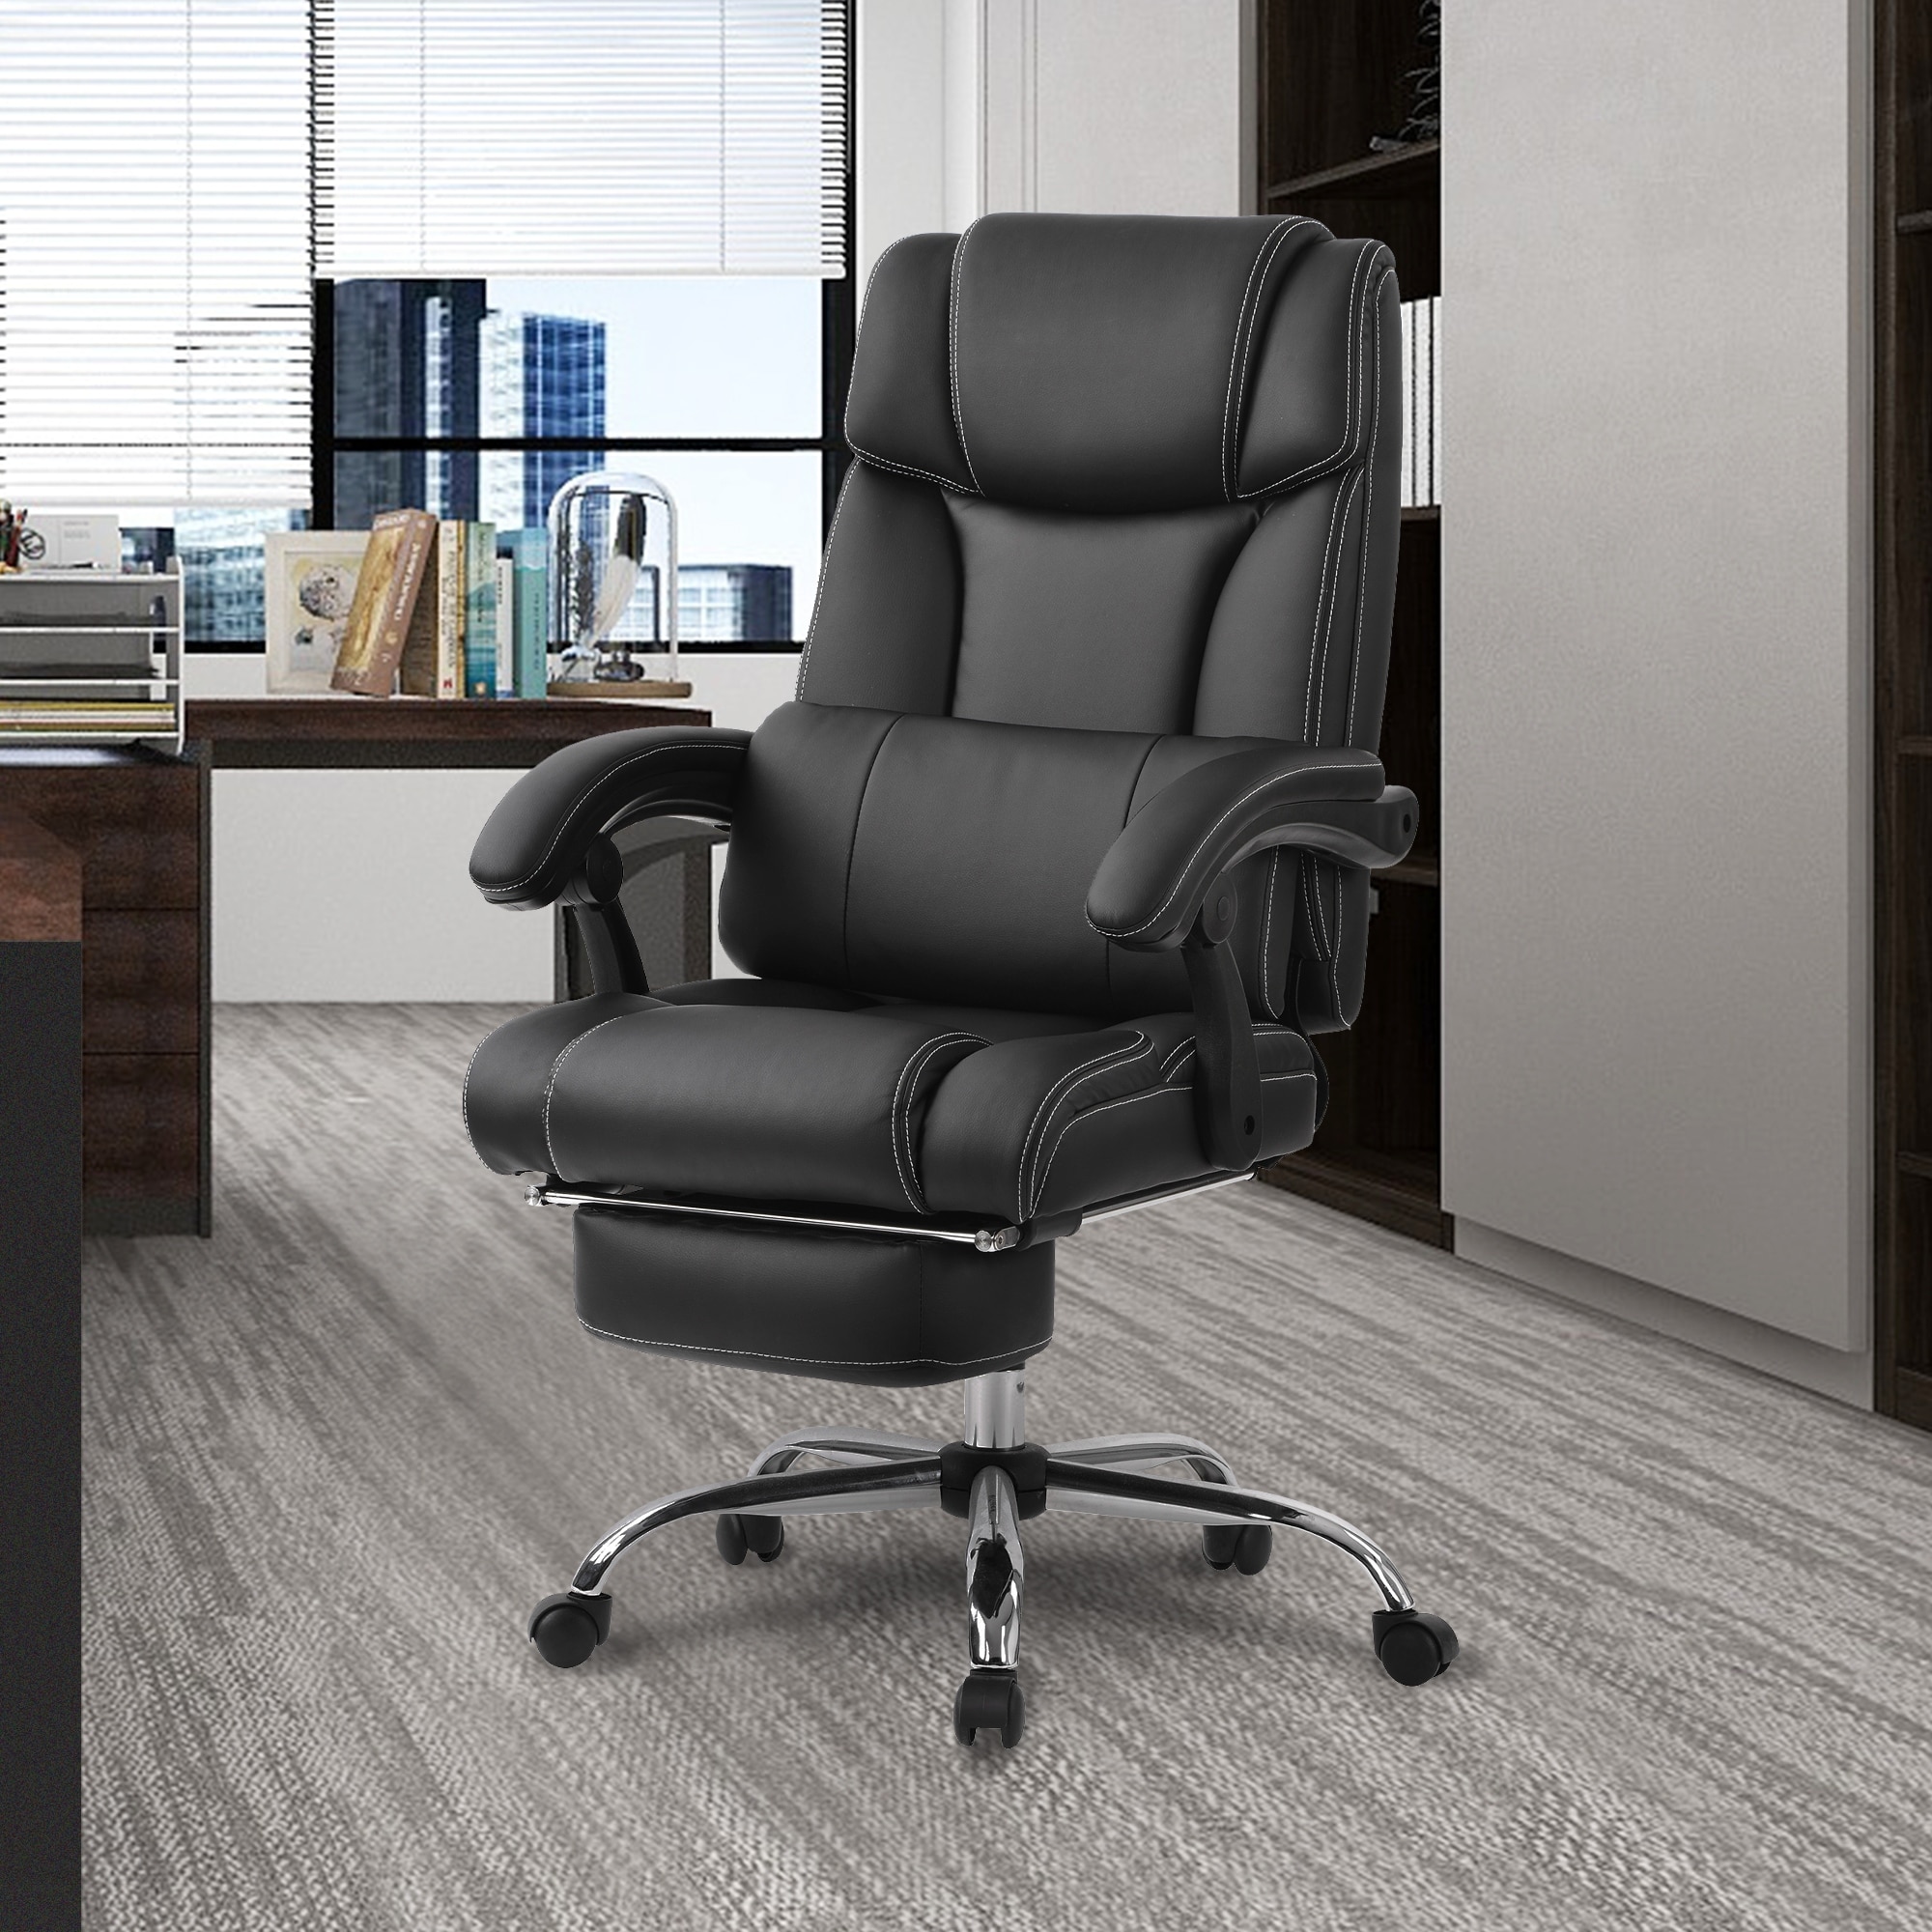 https://ak1.ostkcdn.com/images/products/is/images/direct/13224e884cb27eaef1c8be66227f8389313f0306/Ergonomic-Executive-Office-Chair-PU-Leather-Swivel-Chairs%2C-Adjustable-Height-Reclining-Chair-with-Padded-Armrest-and-Footrest.jpg